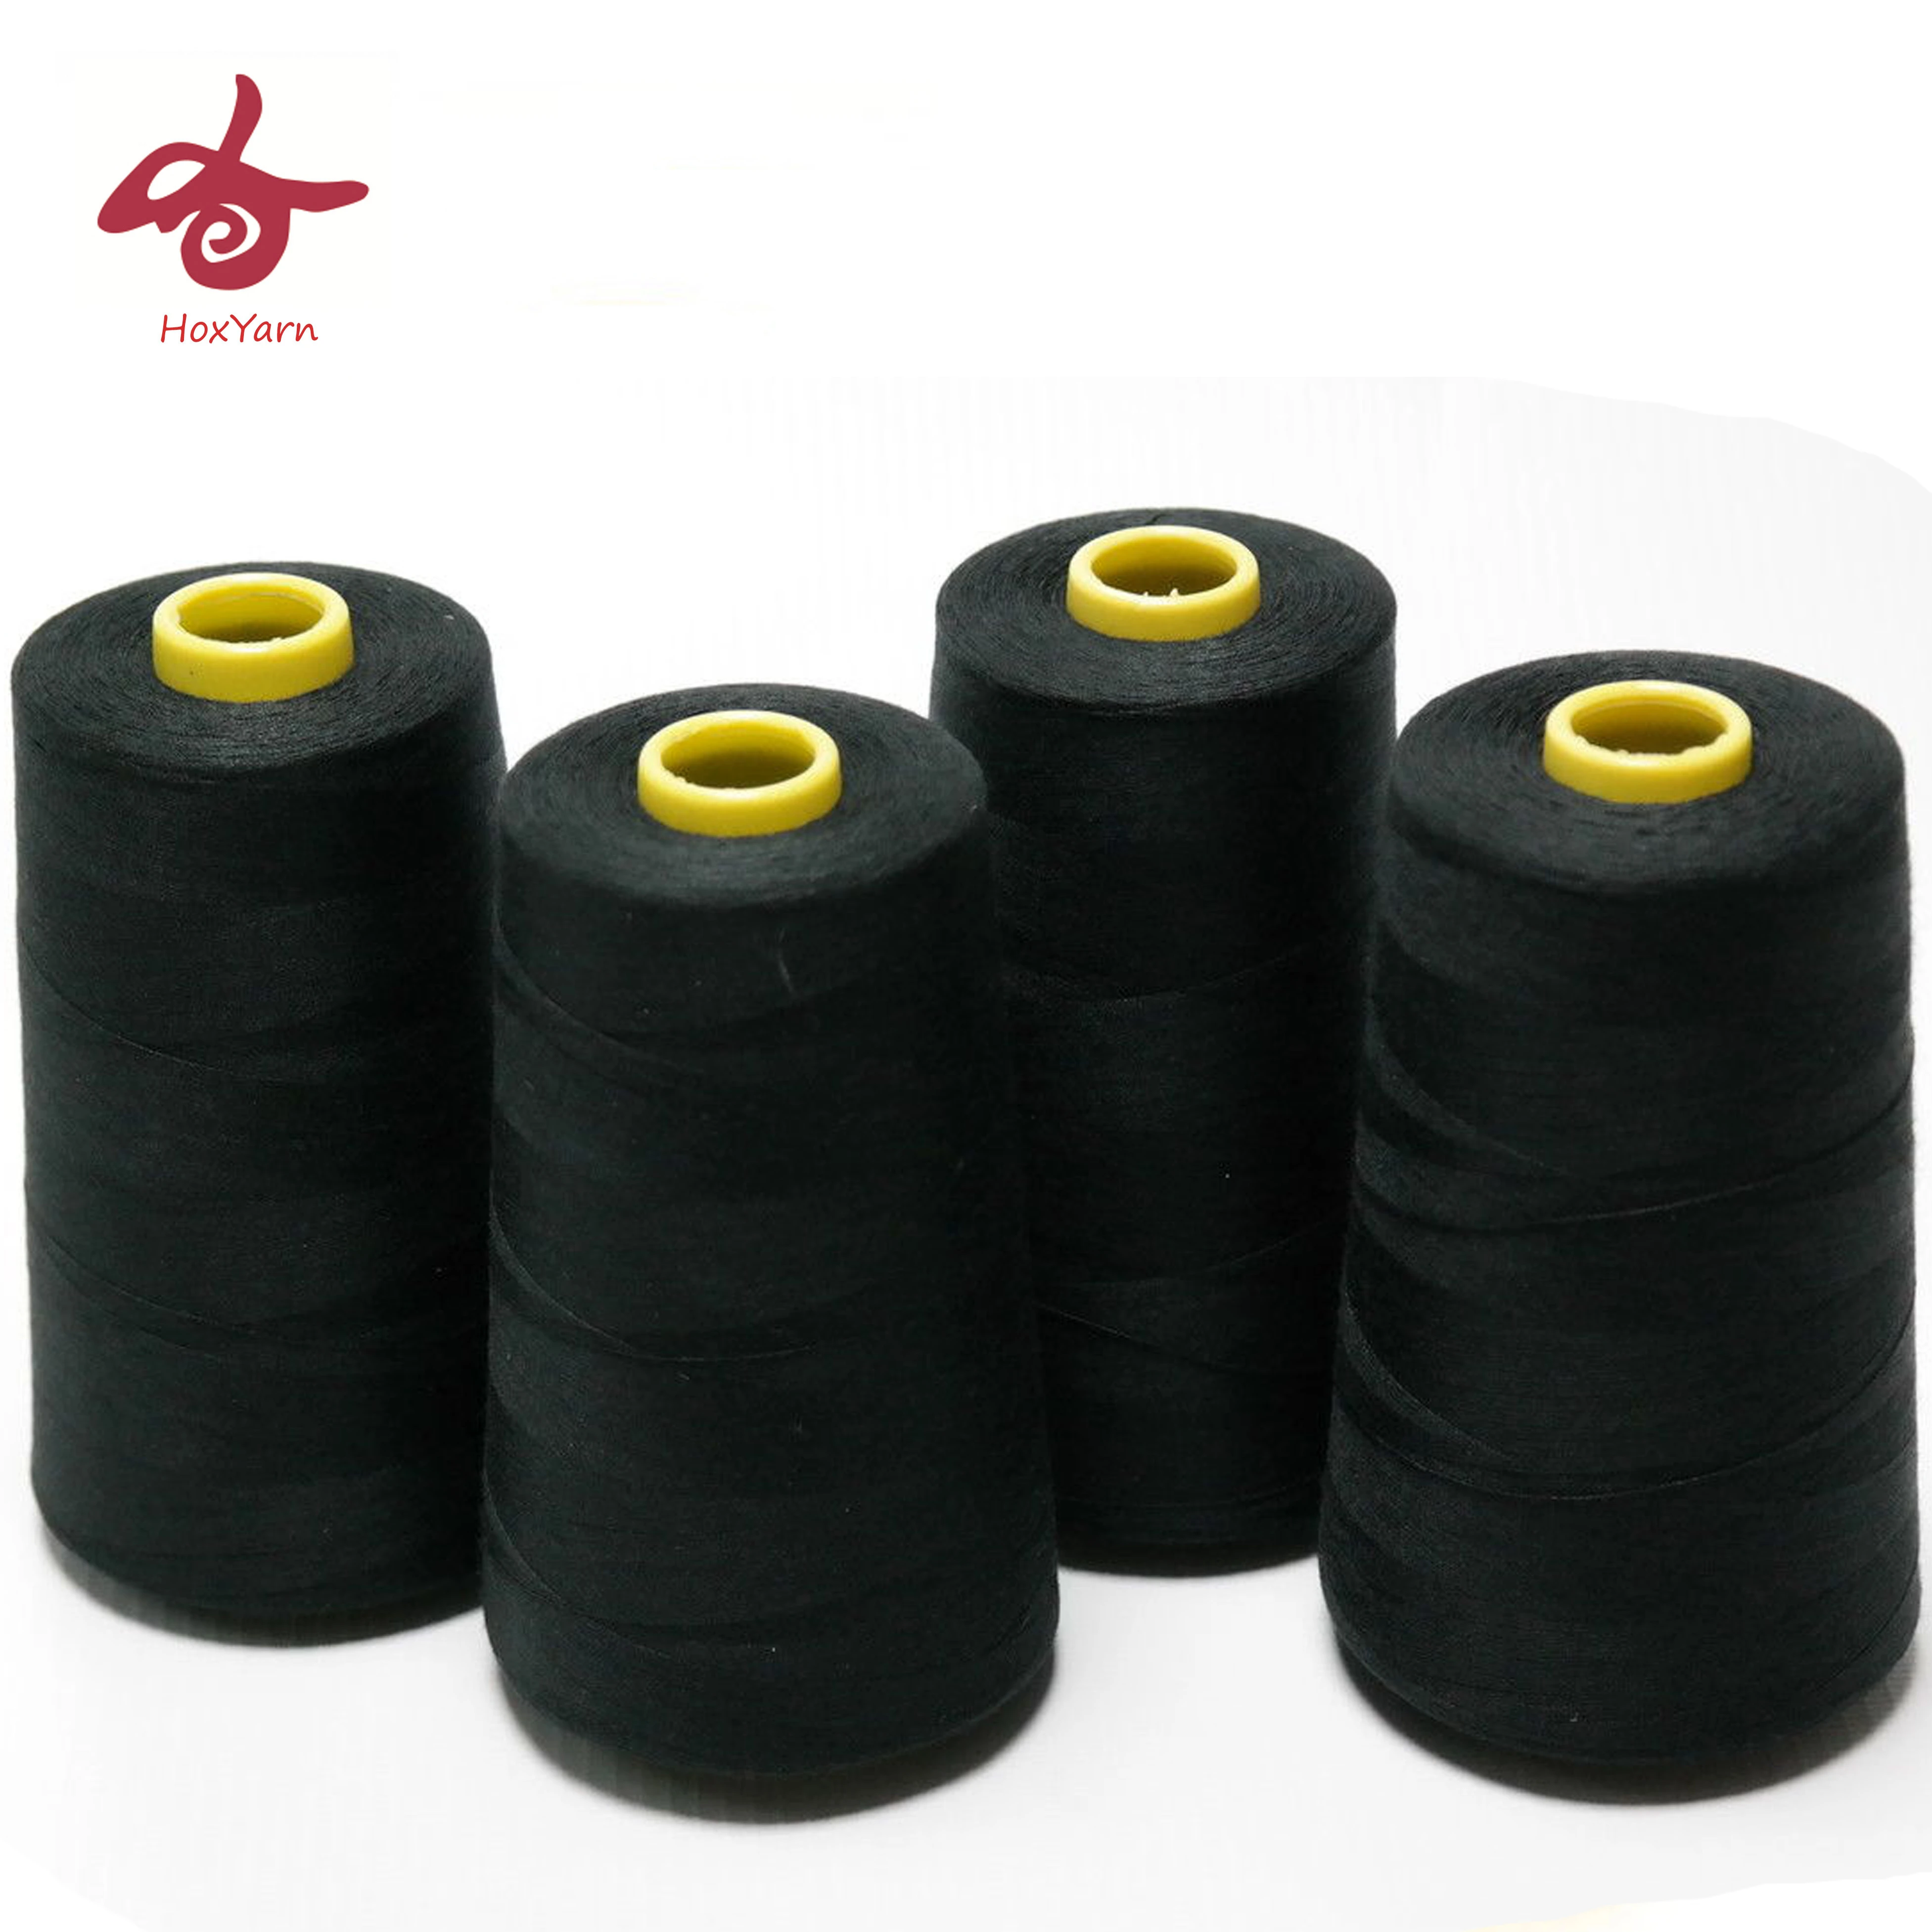 Wholesale Sewing Supplies Black 100%Polyester 40/2 Staple Fiber Sewing Thread in Bluk